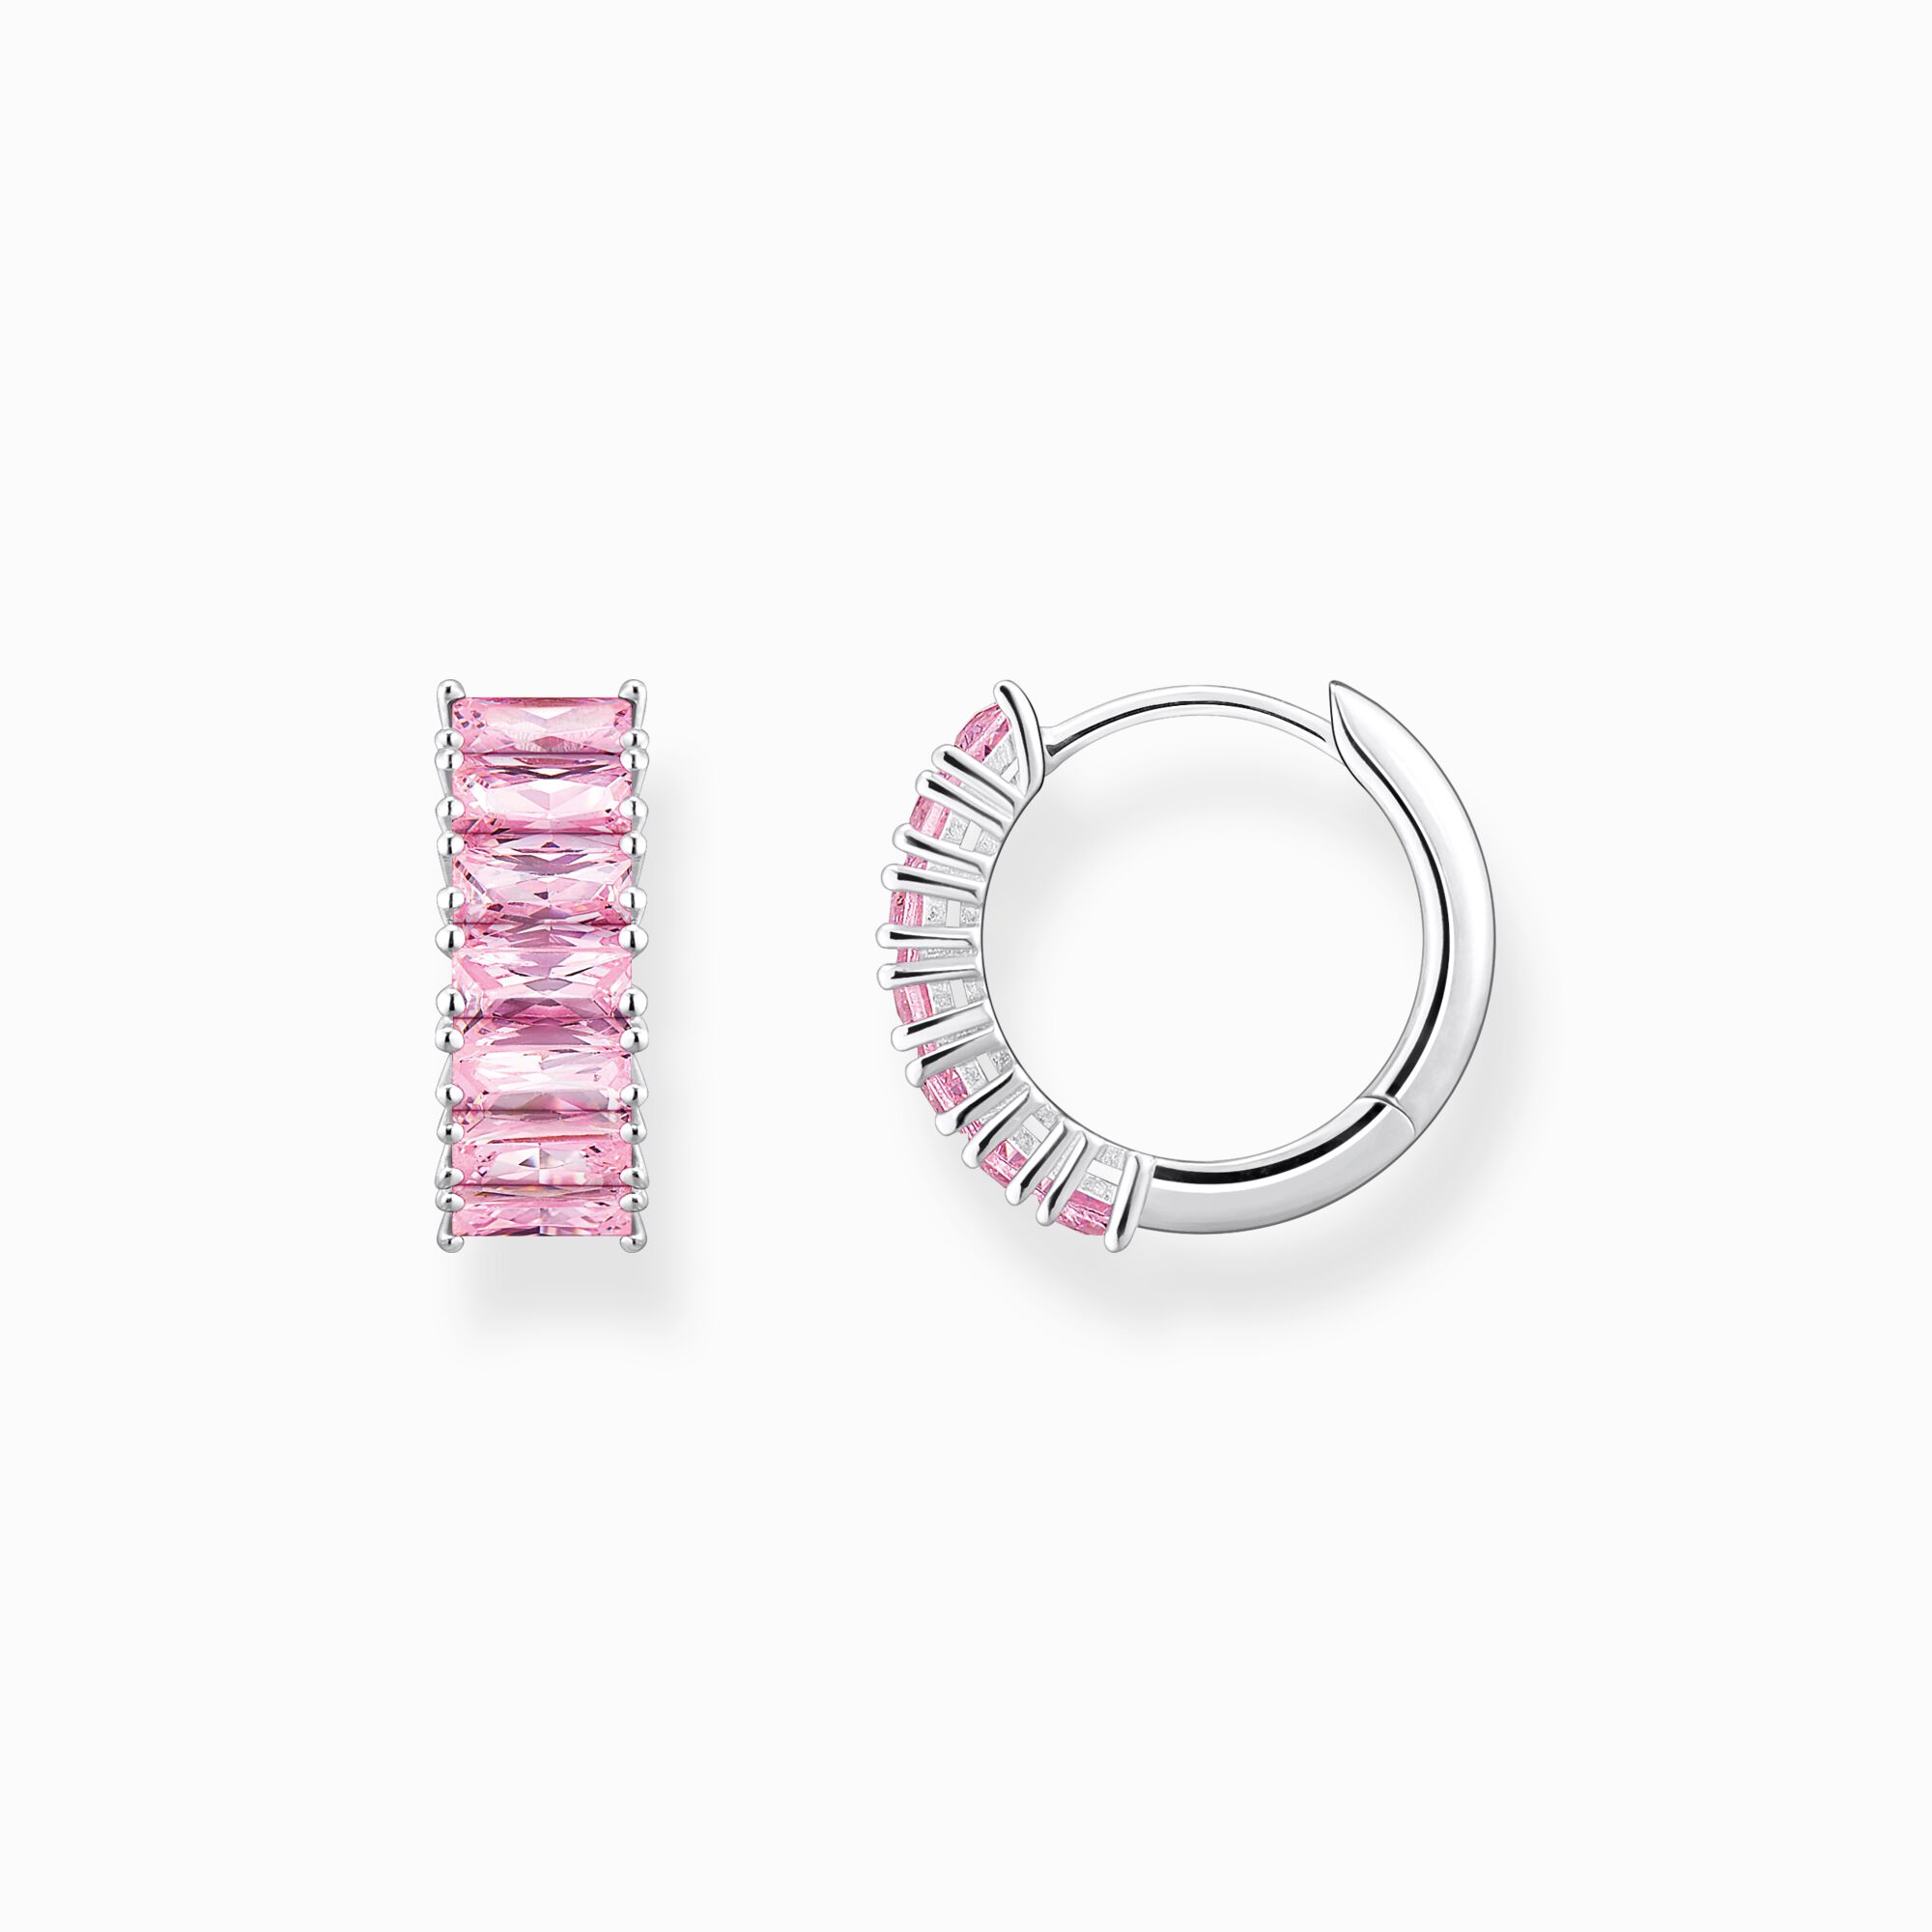 Cocktail ring: pink stone, silver